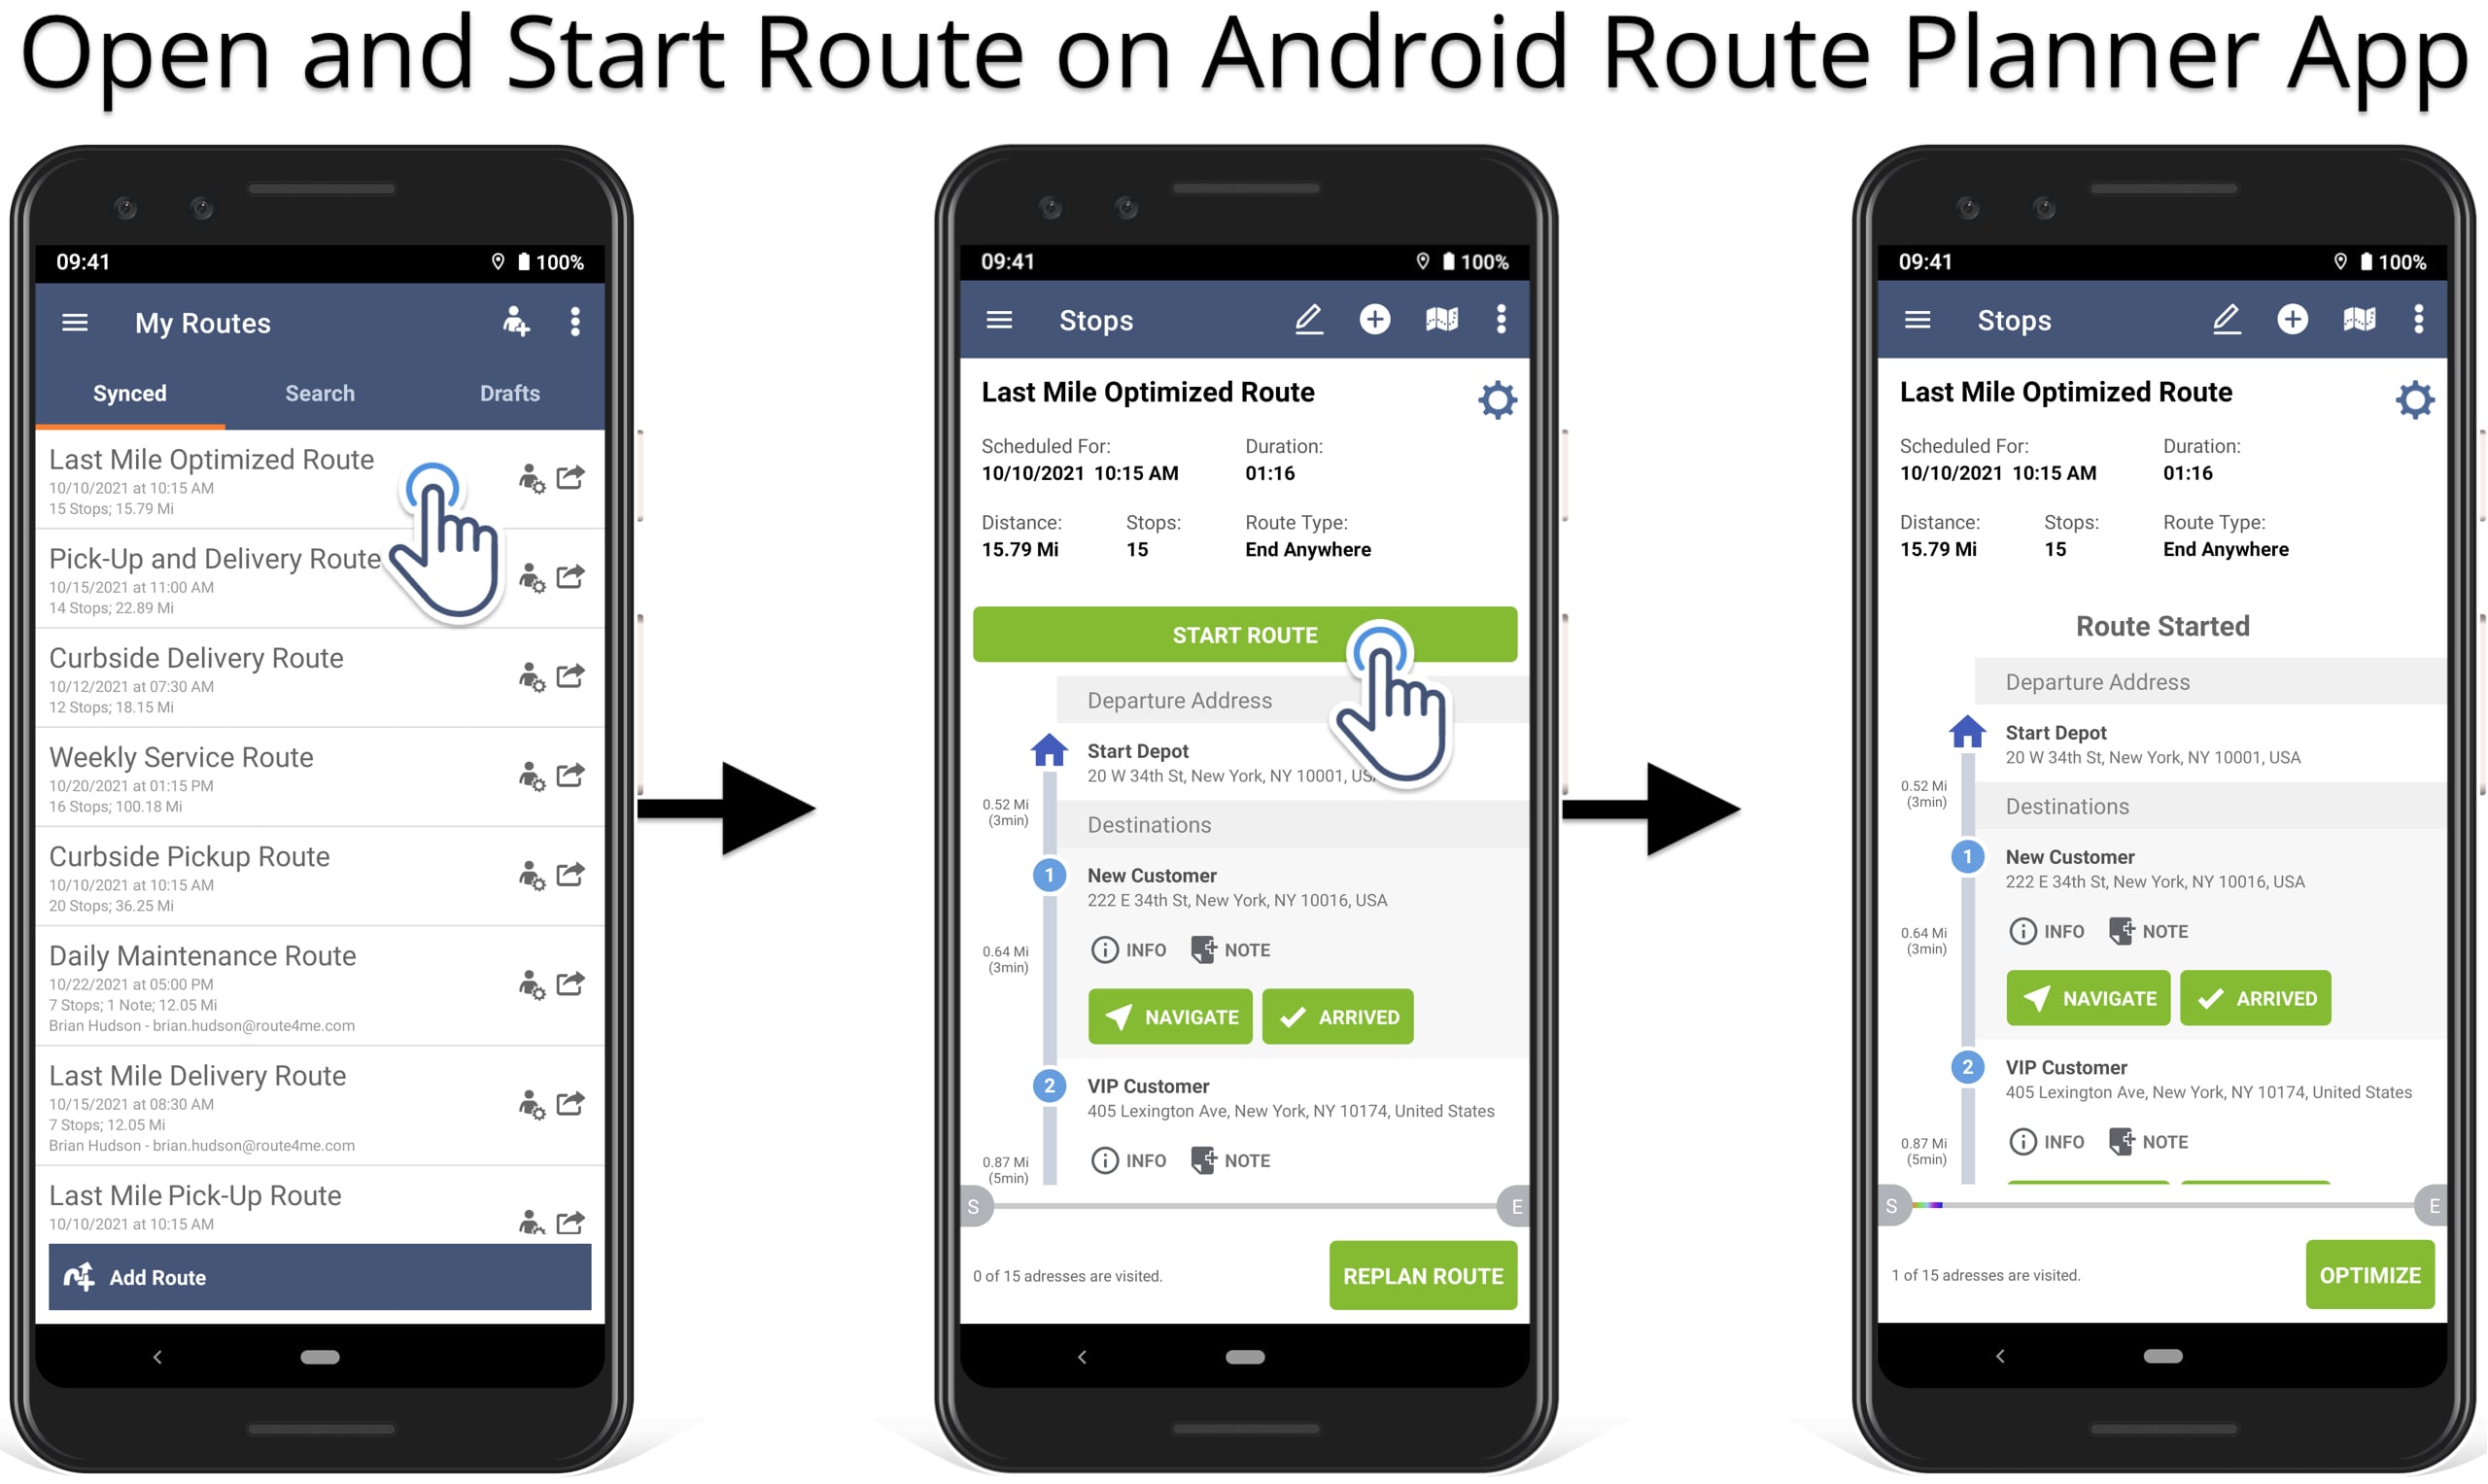 Open and start route on Route4Me's Android Route Planner app to start route navigation.